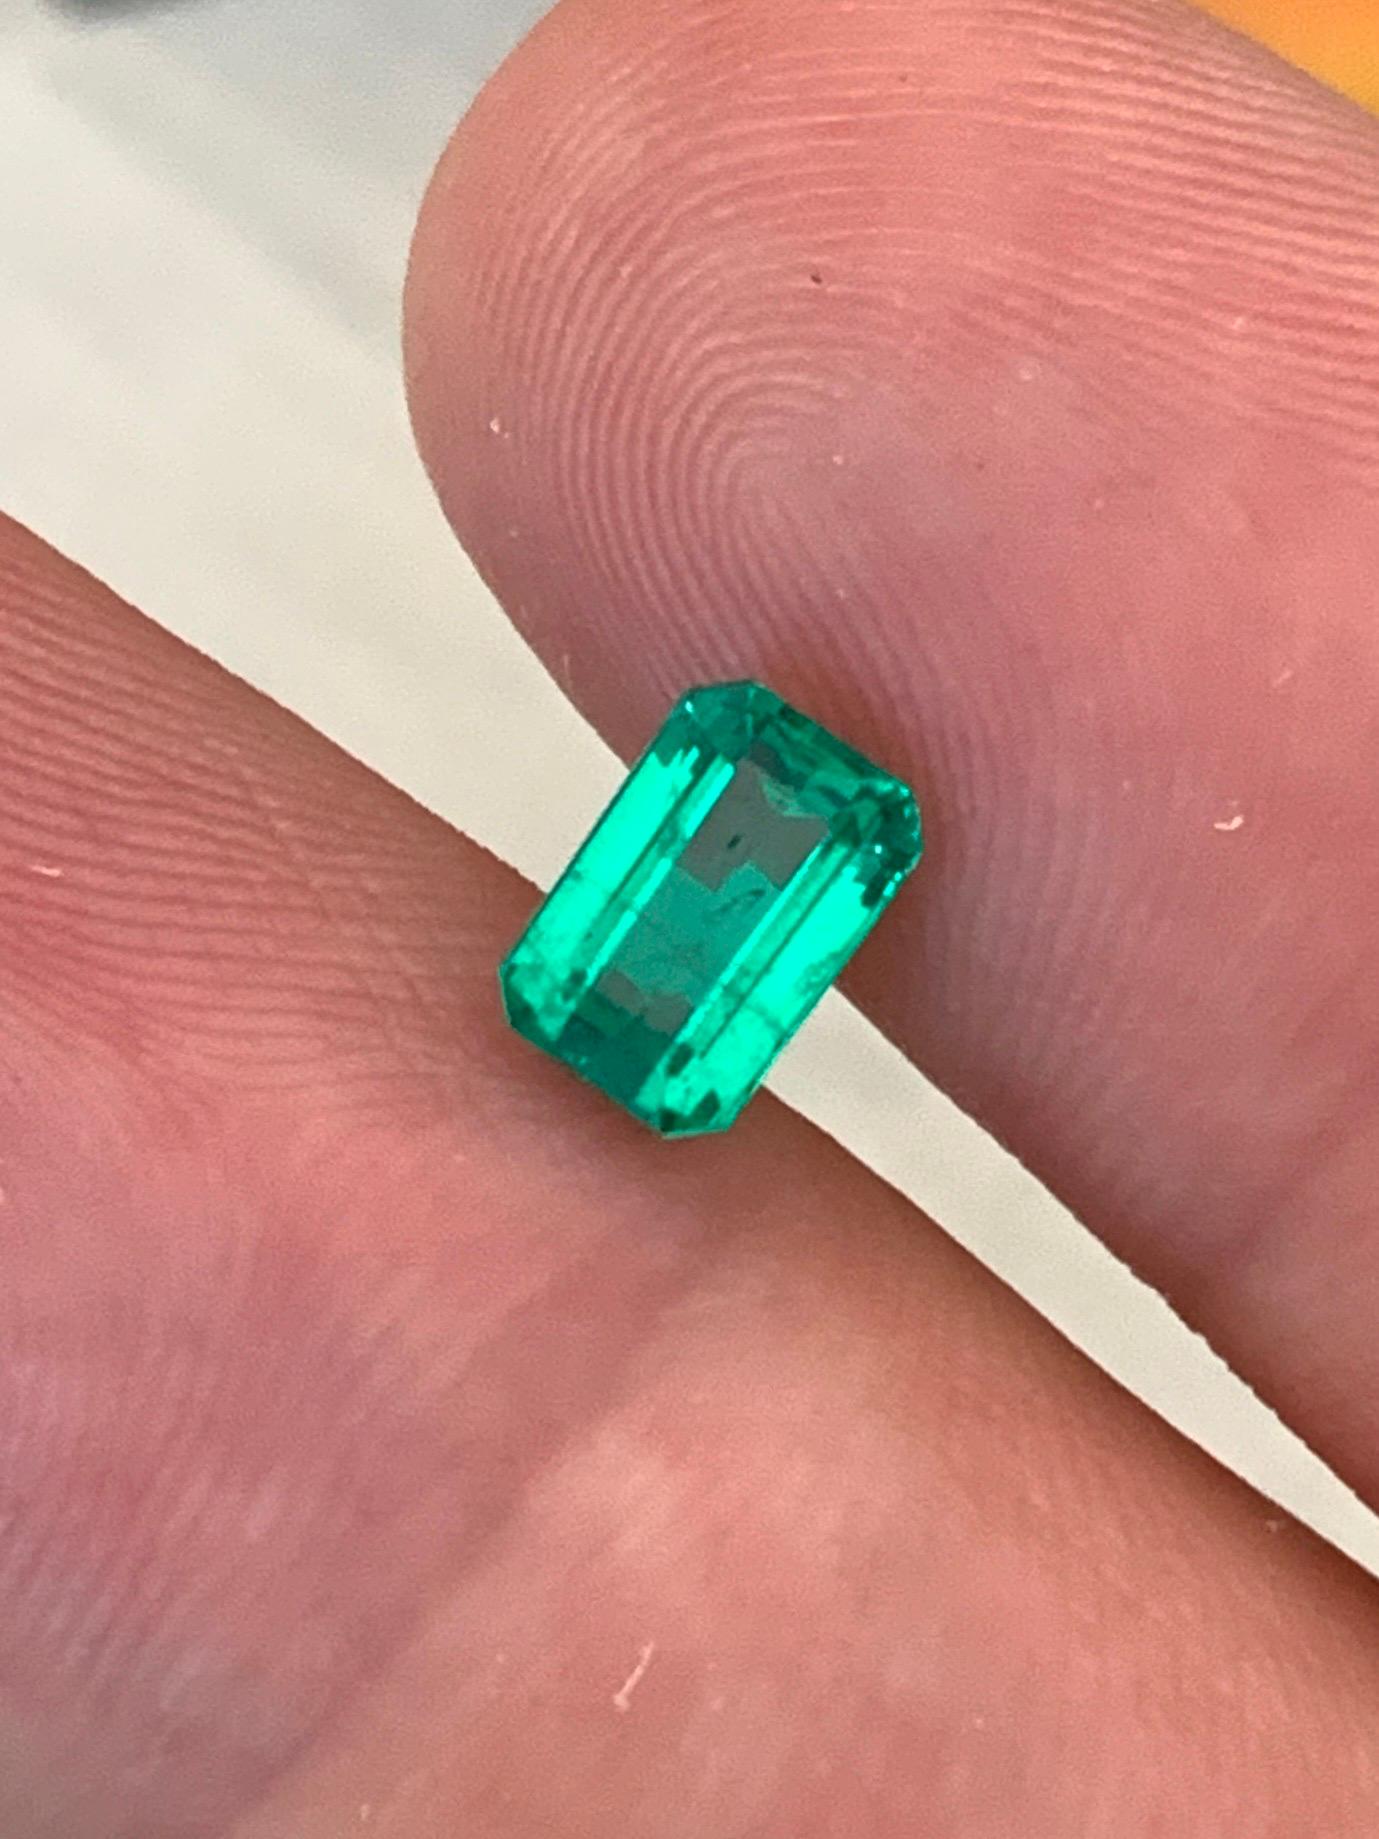 ITEM DESCRIPTION: 
Gem type : Natural Emerald
Origin: Afghanistan (Panjshir)
Treatment:  Minor Oil
Color: Viivd Green
shape: Octagon 
Size:  1.13 Carats


Emeralds from the Panjshir Valley in Afghanistan are renowned for their exceptional quality